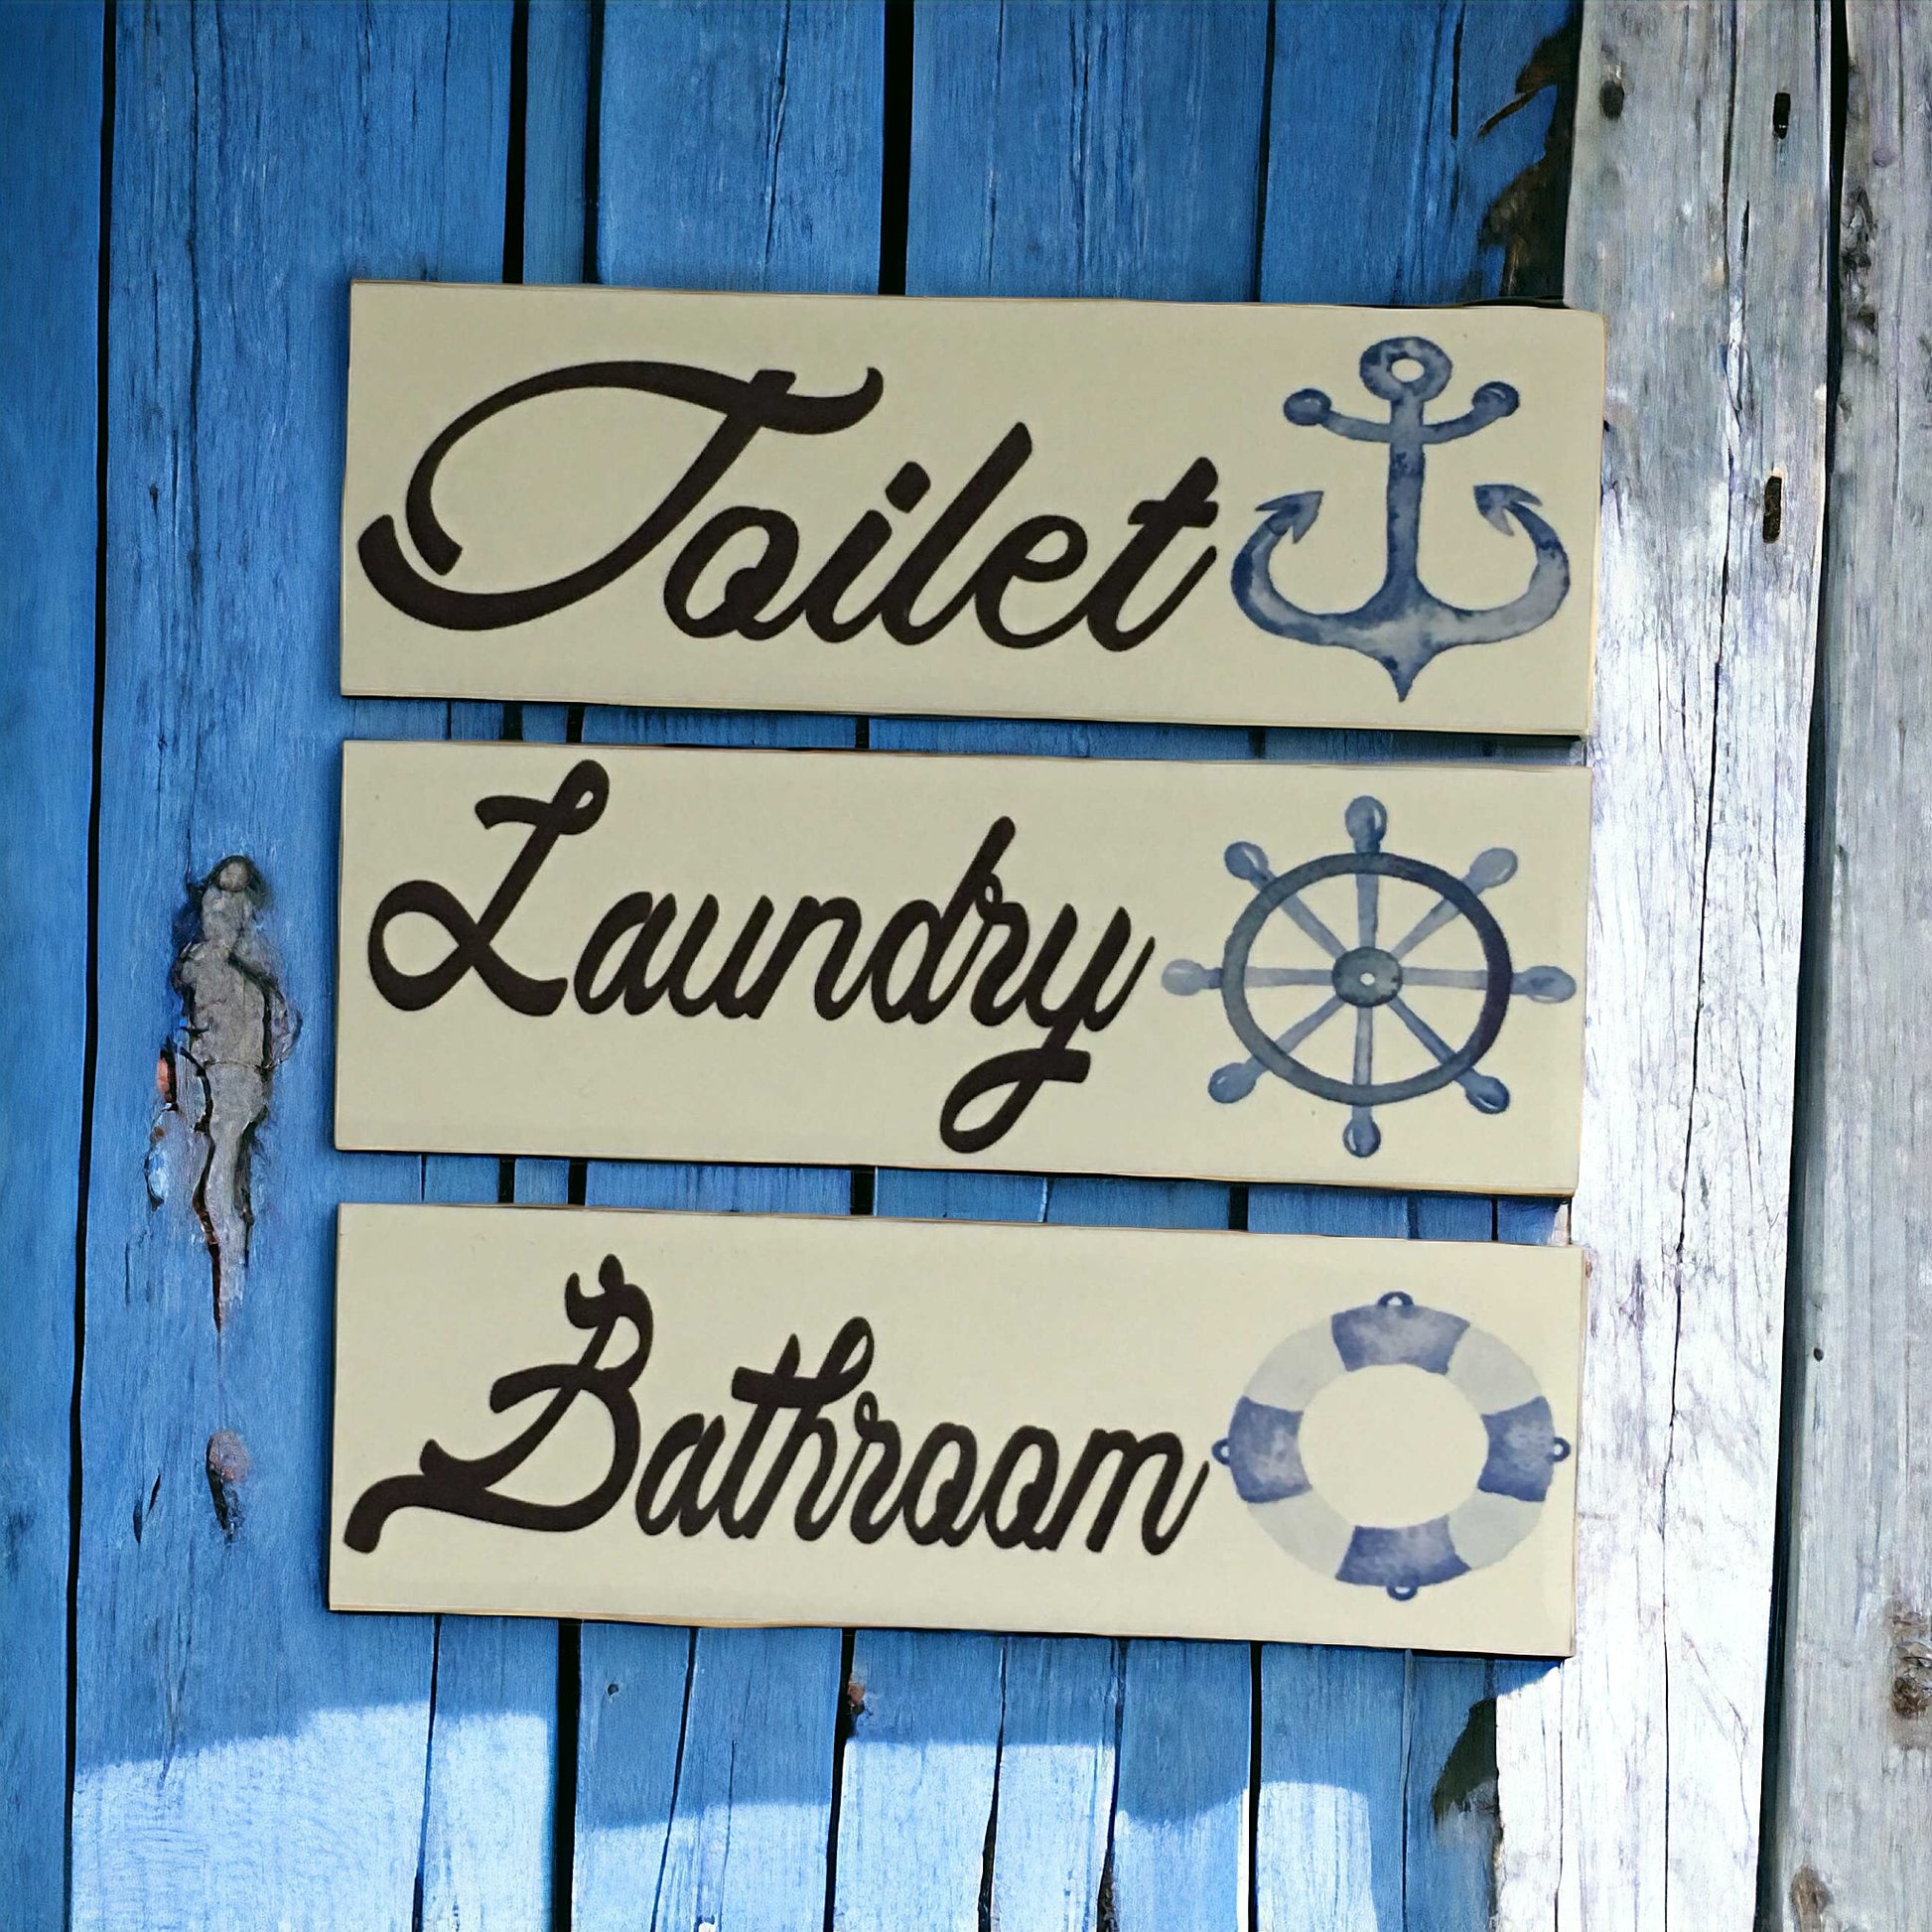 Nautical Boat Door Room Sign Toilet Laundry Bathroom - The Renmy Store Homewares & Gifts 